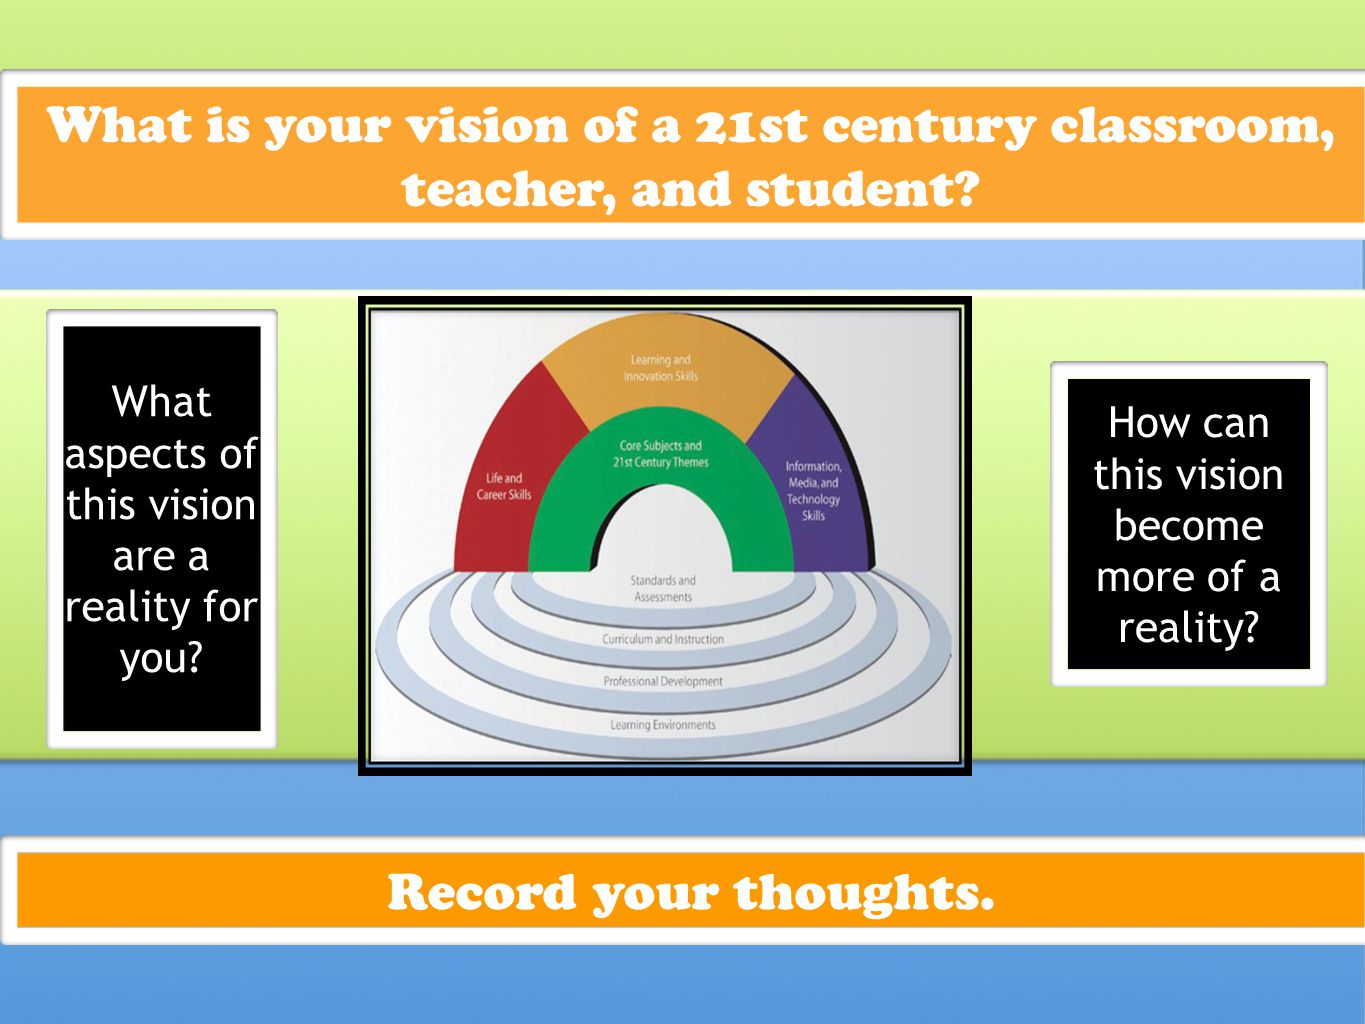 What is your vision of a 21st century classroom, teacher, and student